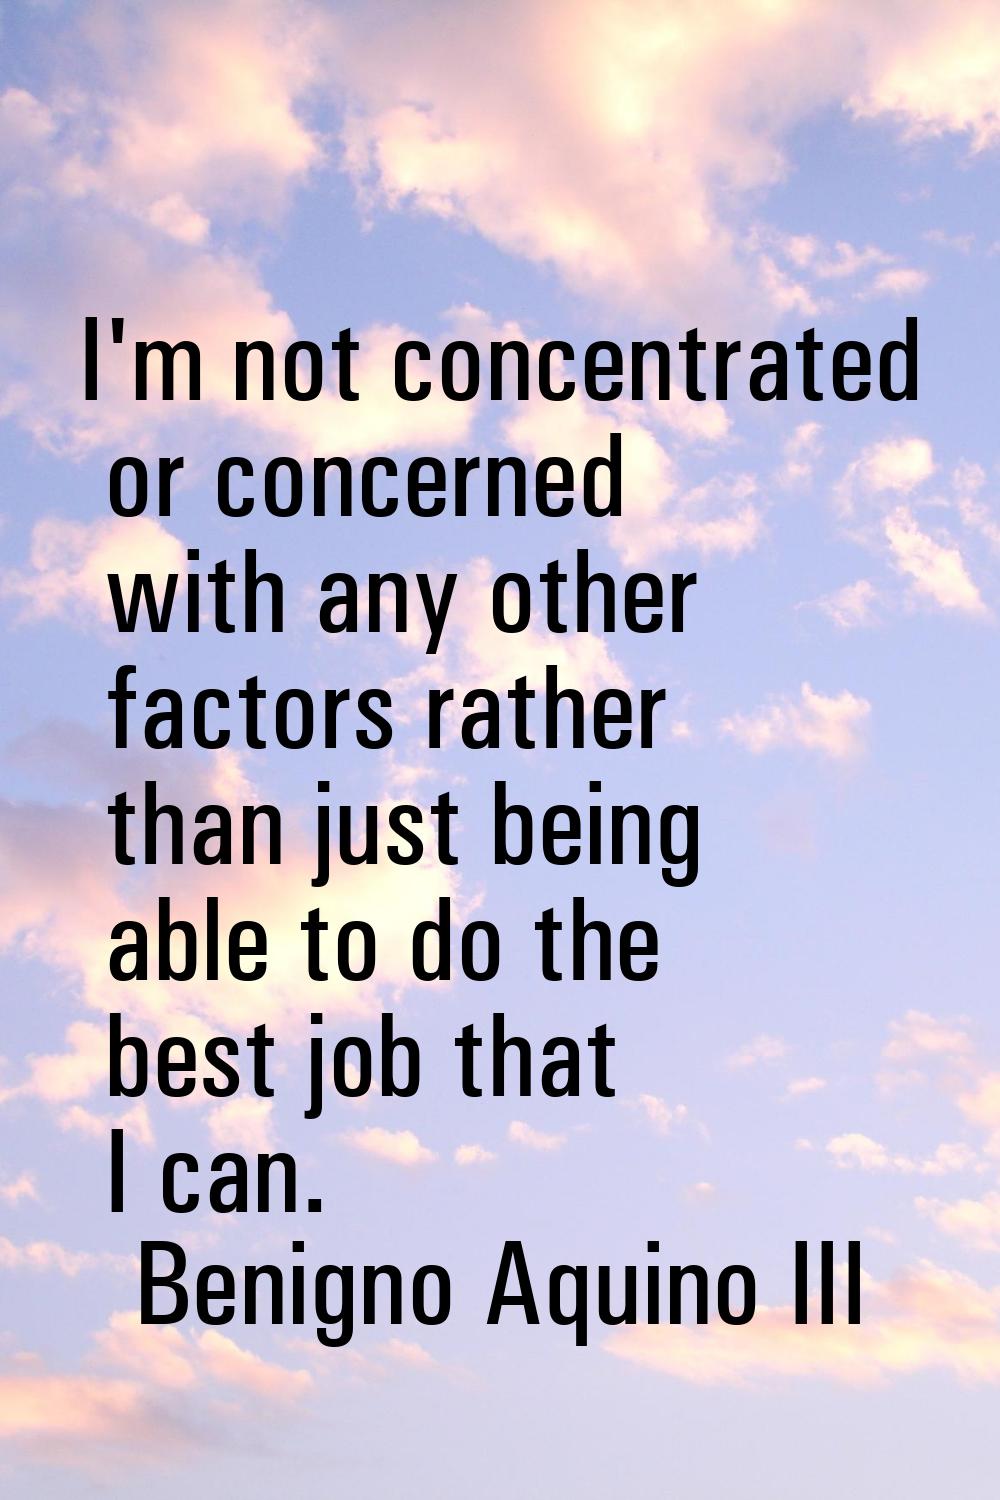 I'm not concentrated or concerned with any other factors rather than just being able to do the best